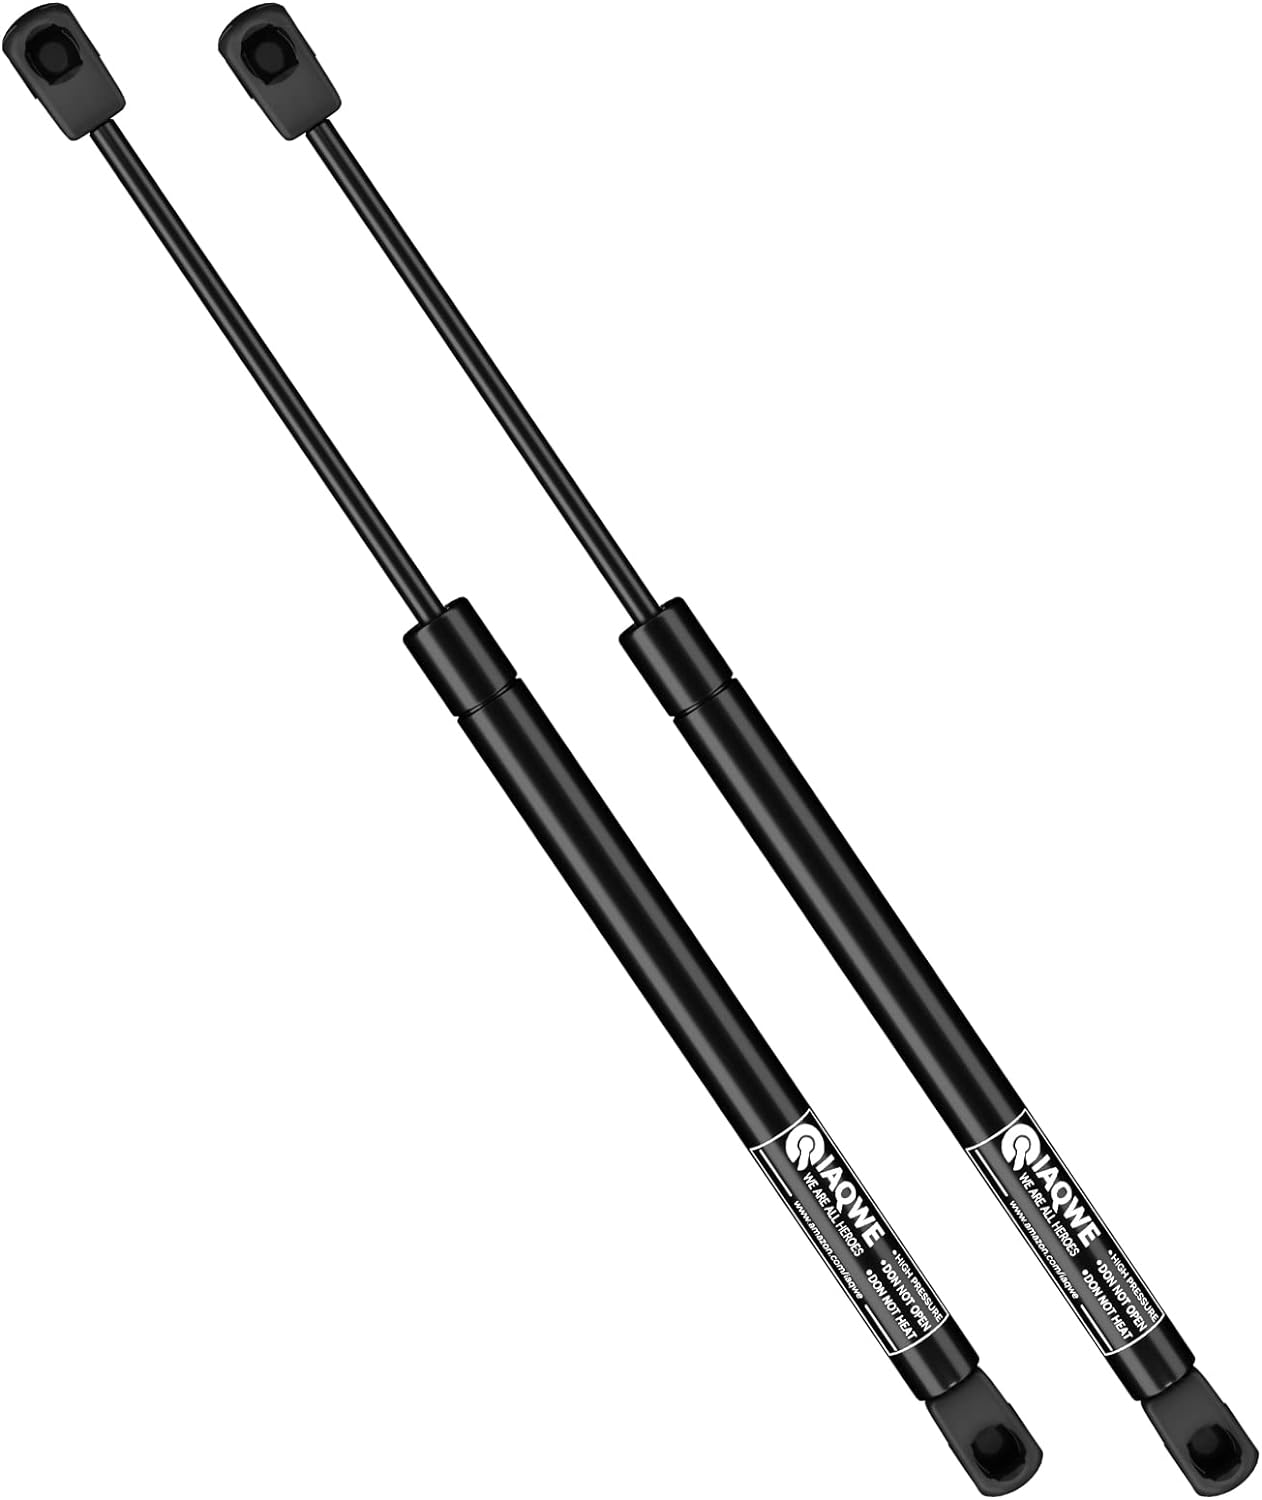 NB-AERO 2ea Gas Shocks for Truck Topper door Gas Struts Gas Shocks Gas Springs Gas lifts 15.25 extended length x 9.5 compressed length x 90 LB Pressure